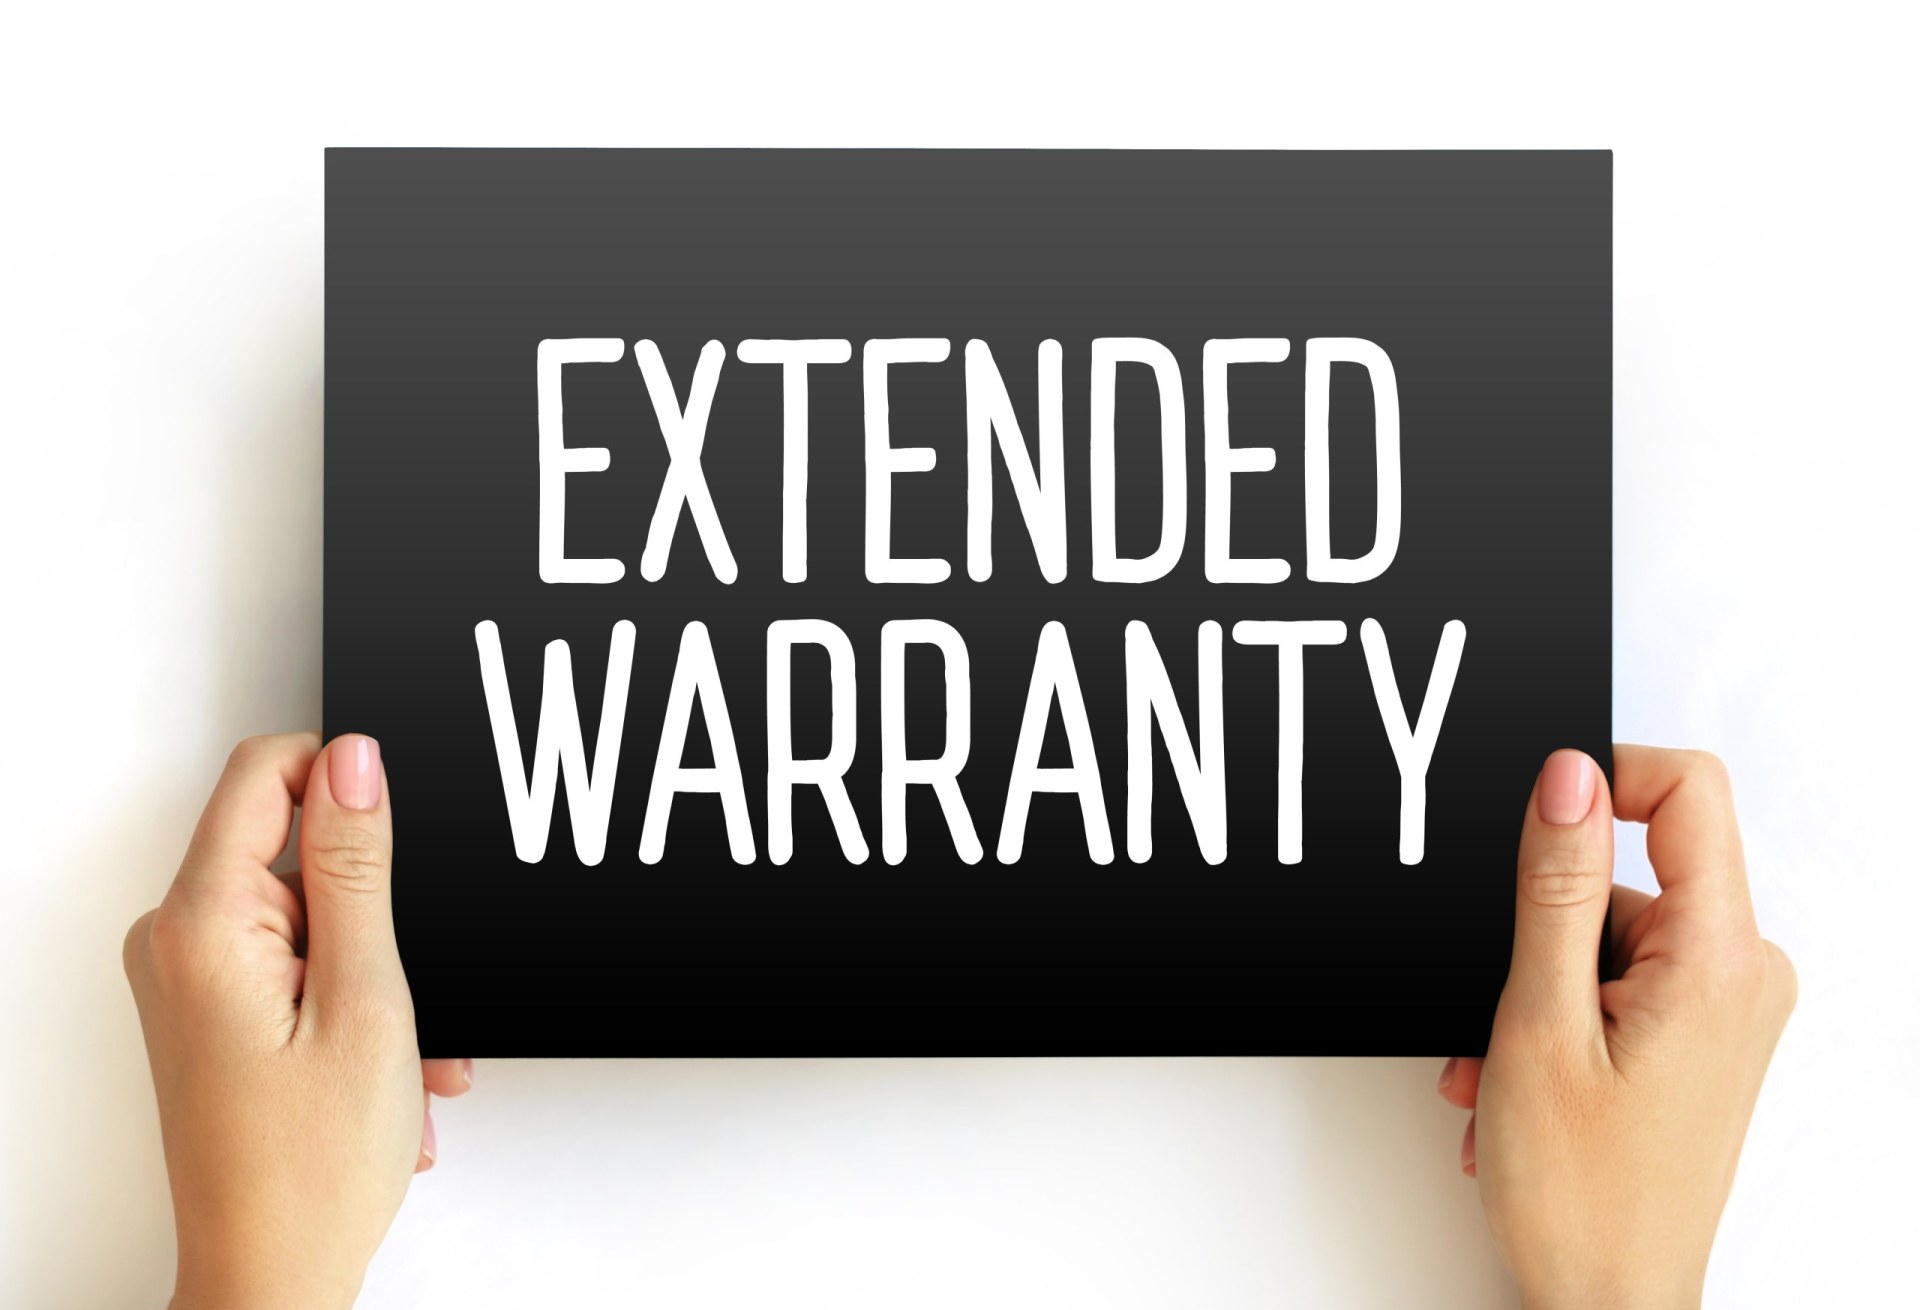 Extended Warranty text concept on card